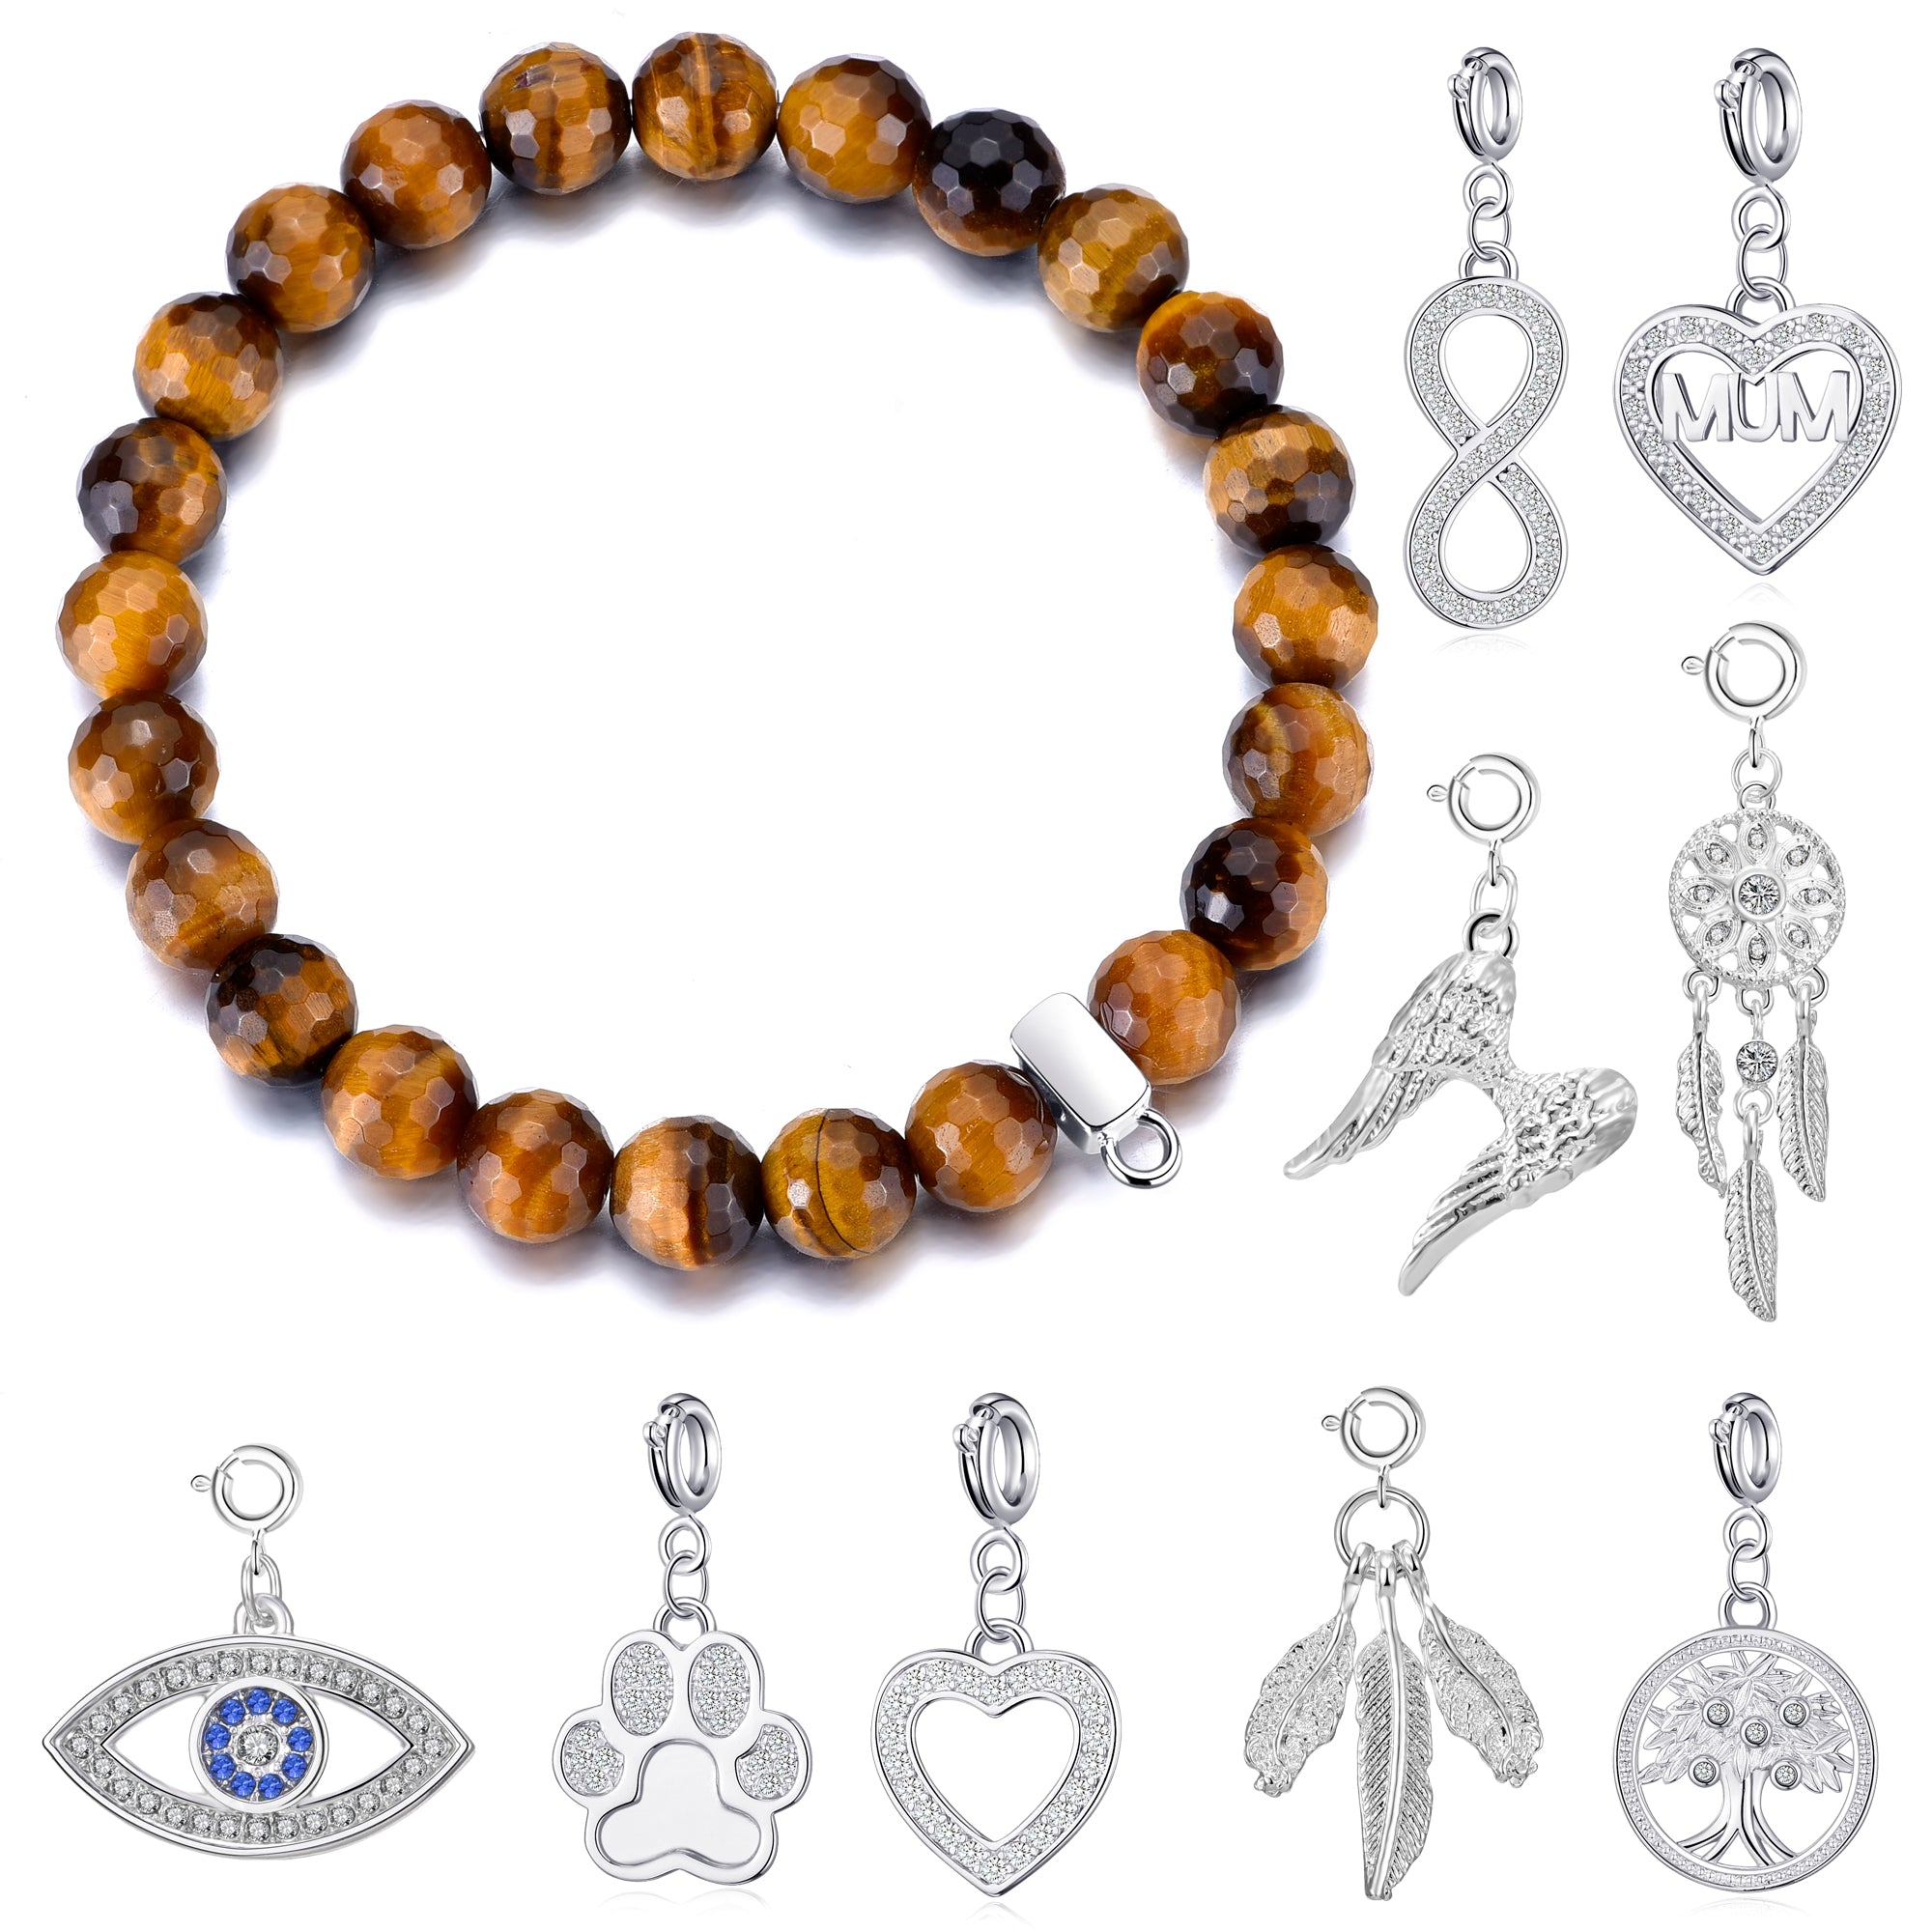 Faceted Tiger's Eye Gemstone Stretch Bracelet with Charm Created with Zircondia® Crystals by Philip Jones Jewellery